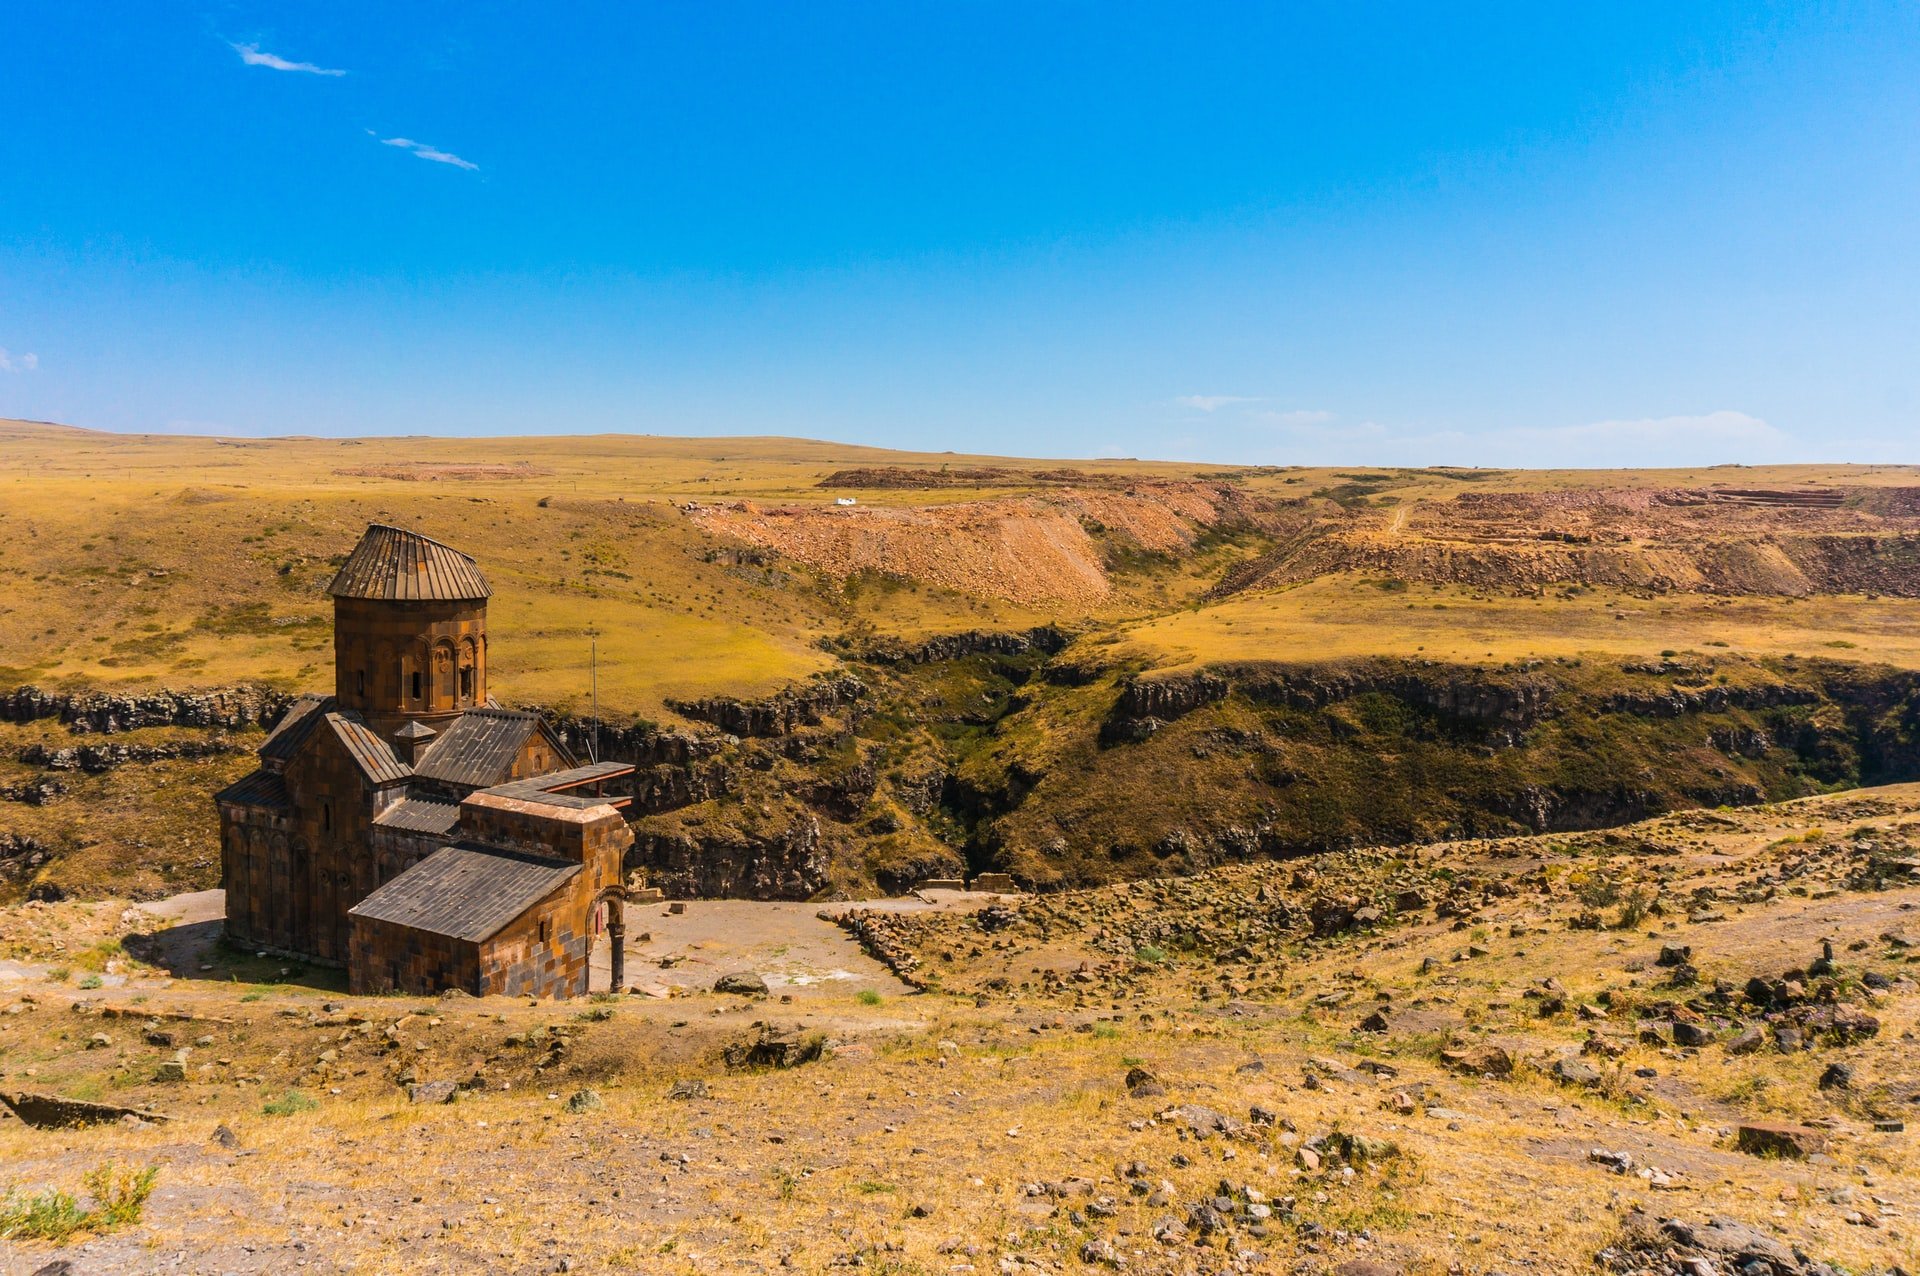 This image shows an ancient church set in a landscape of raw beauty.